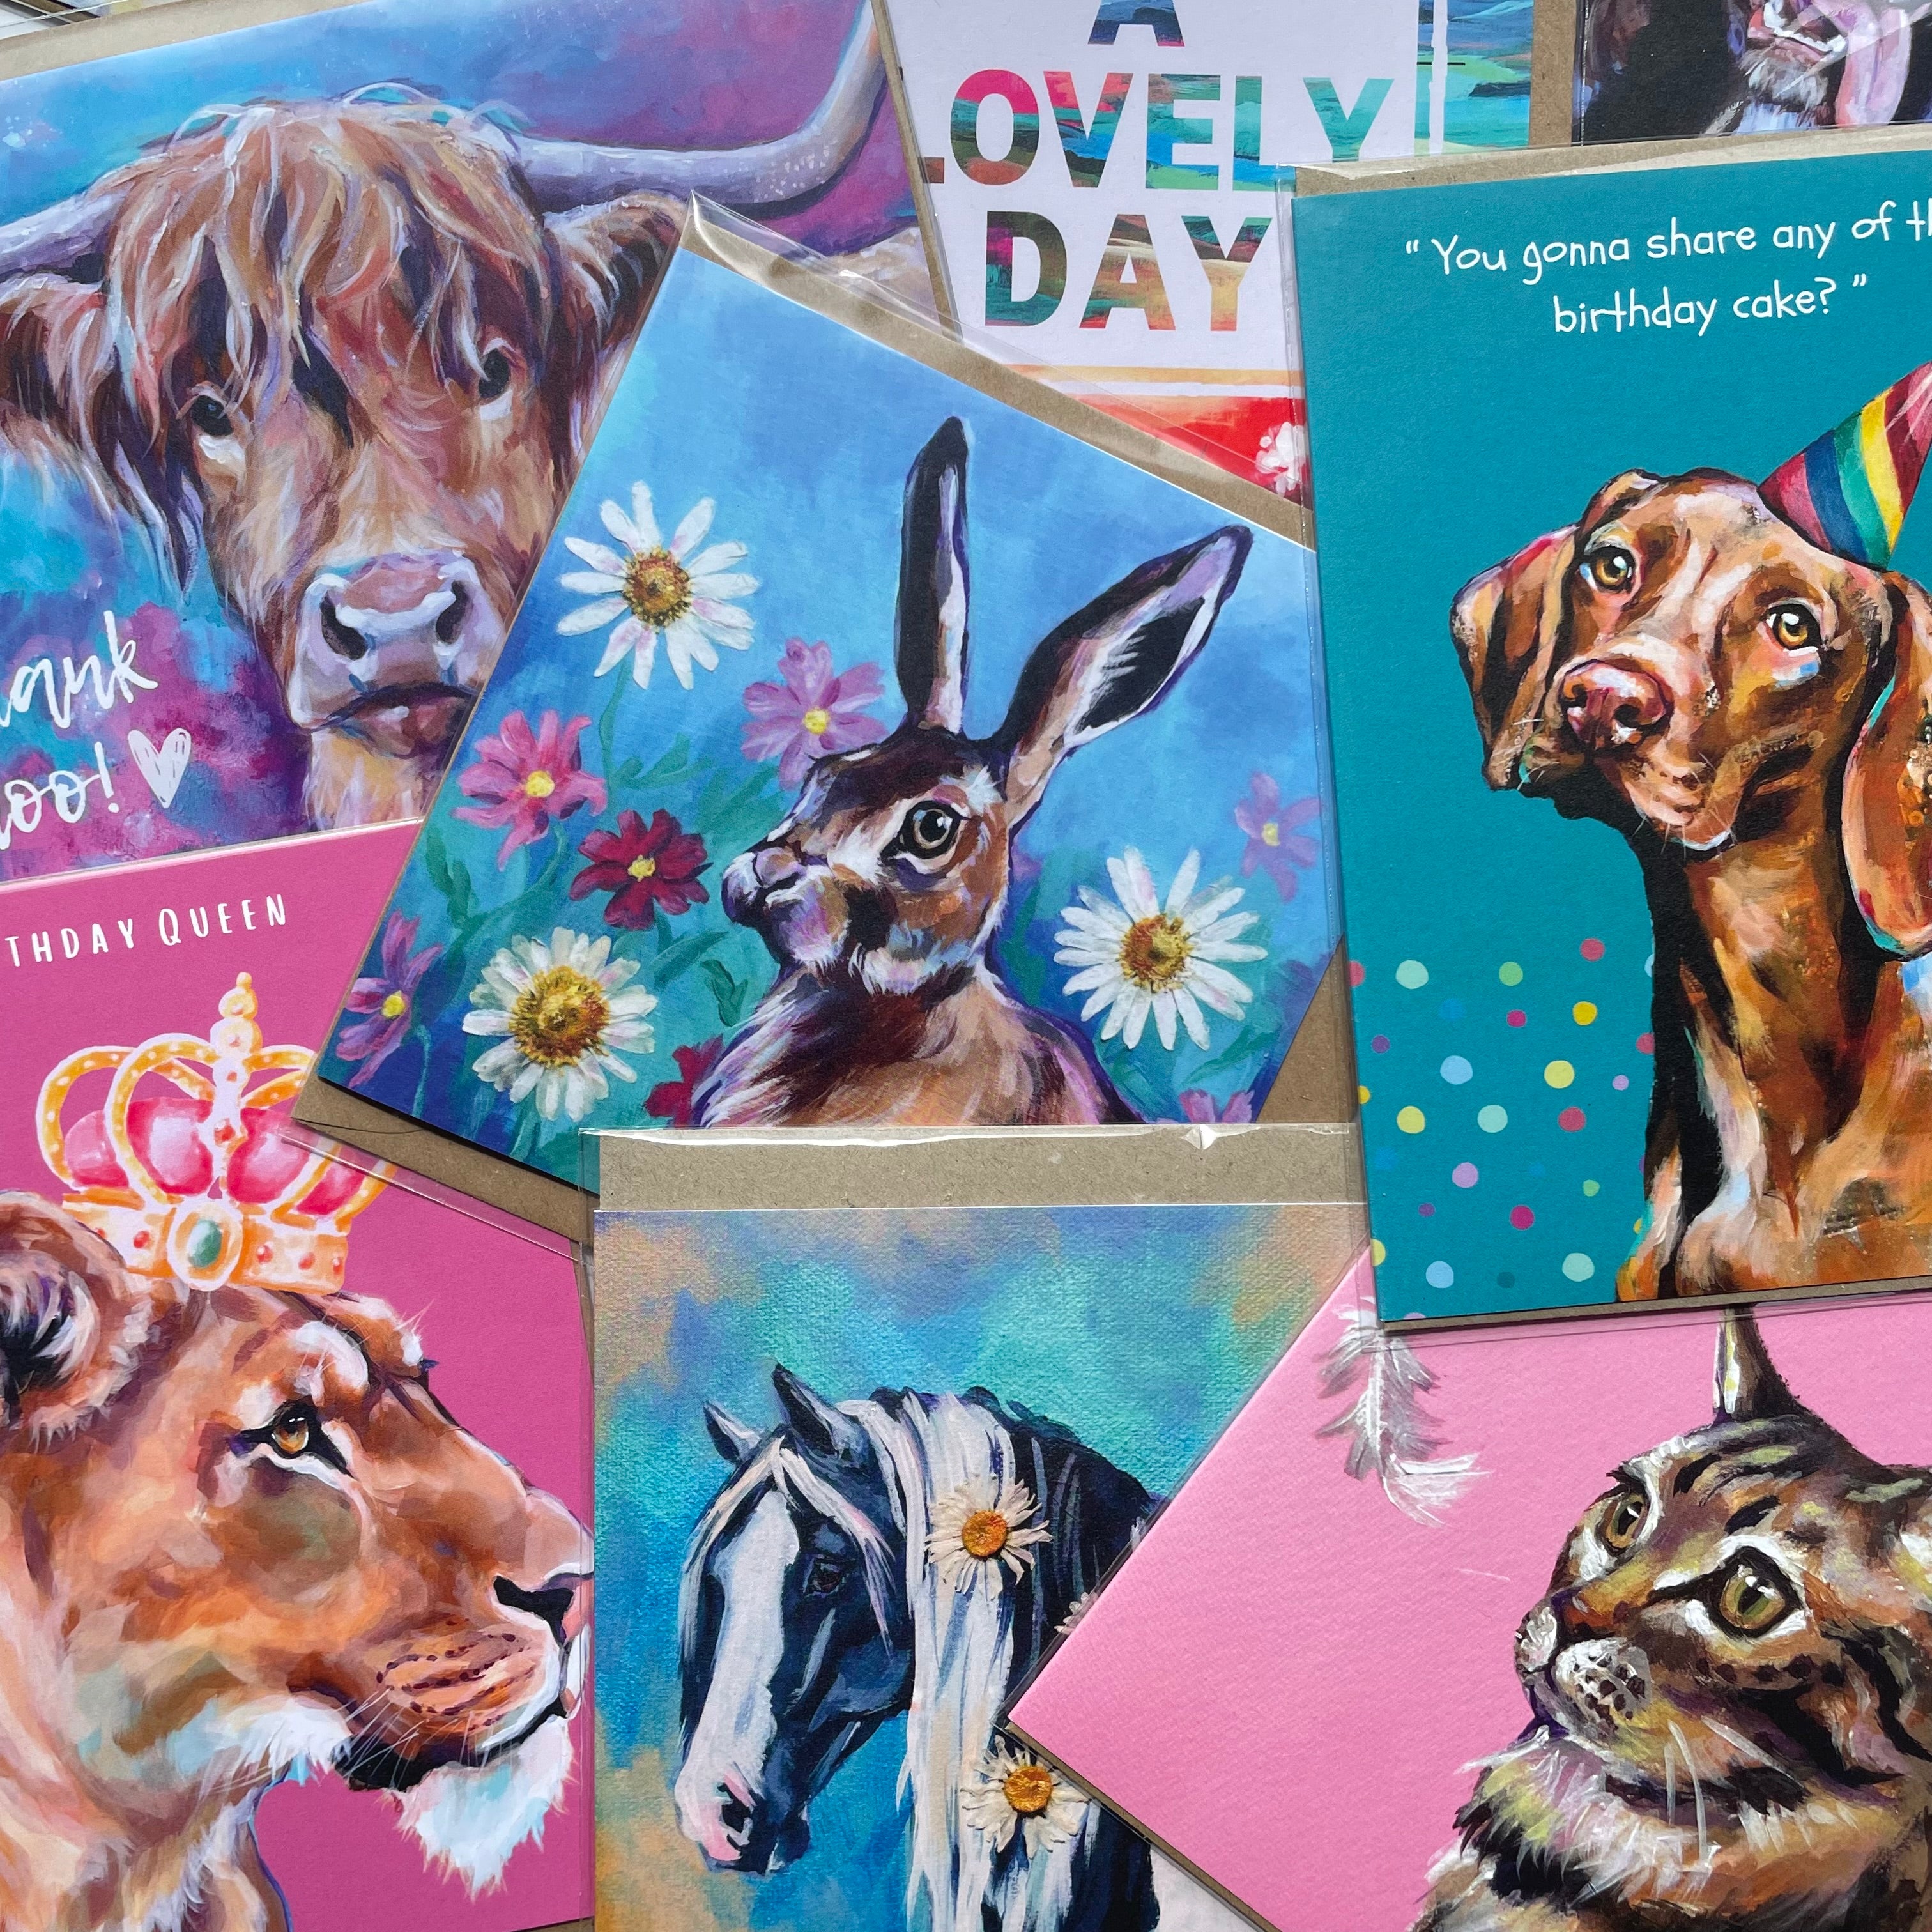 selection of animal art greetings cards by artist Anj Jamieson displayed in a random fashion